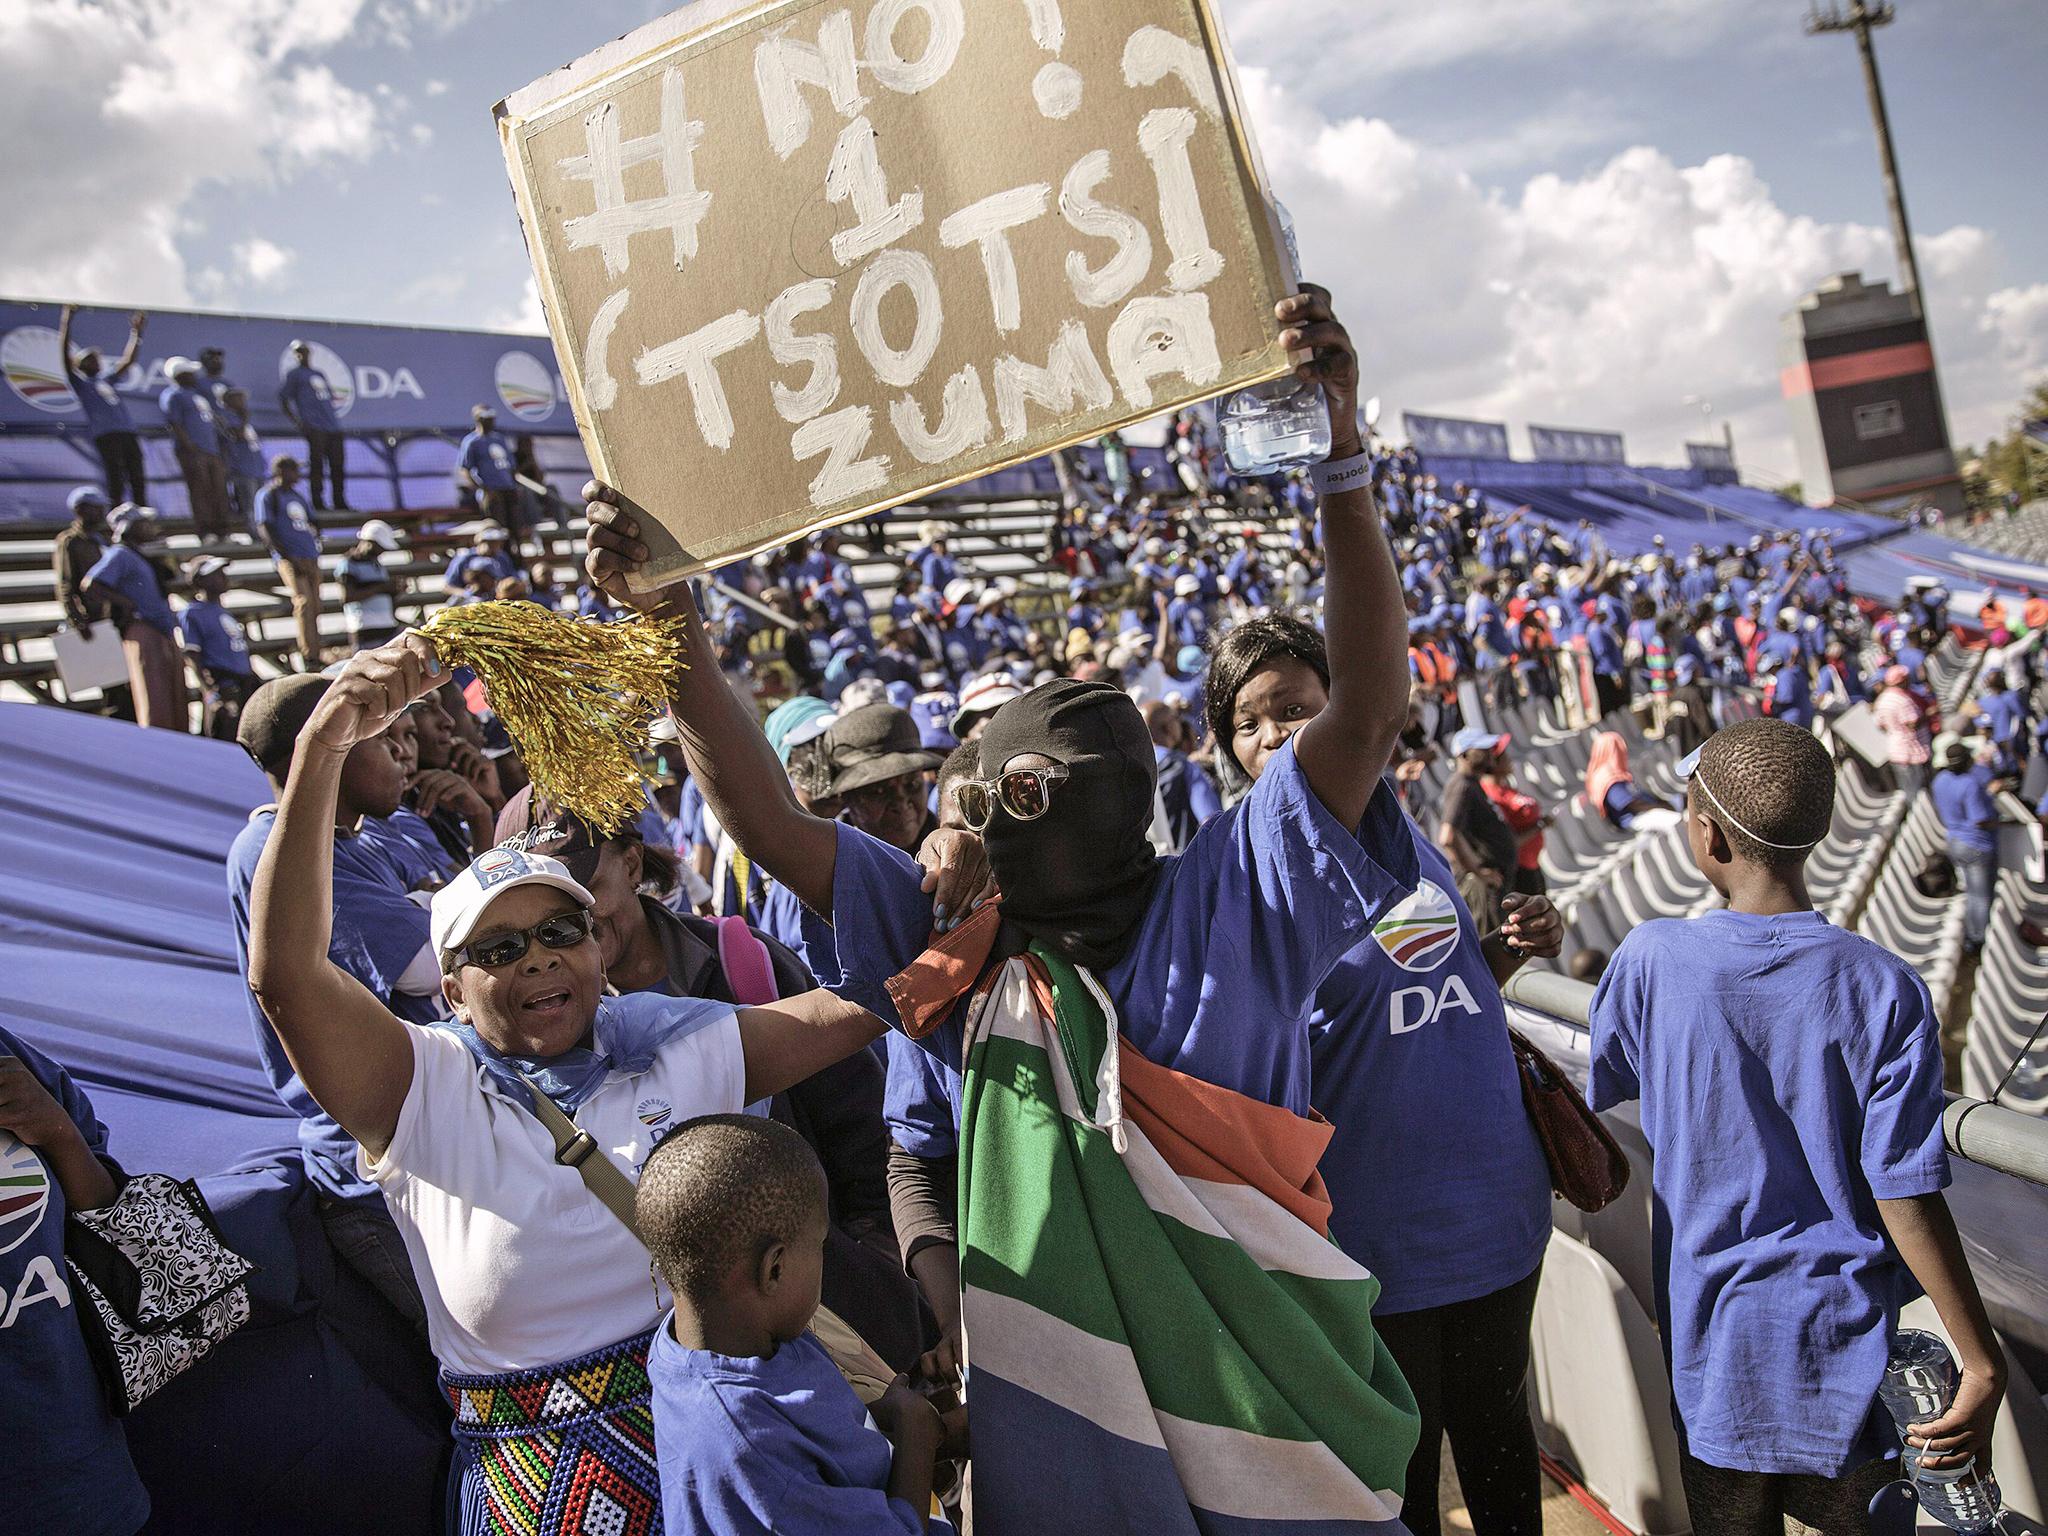 Main opposition party Democratic Alliance supporters hold banners mocking the president, in Johannesburg. 'Tsotsi' means gangster